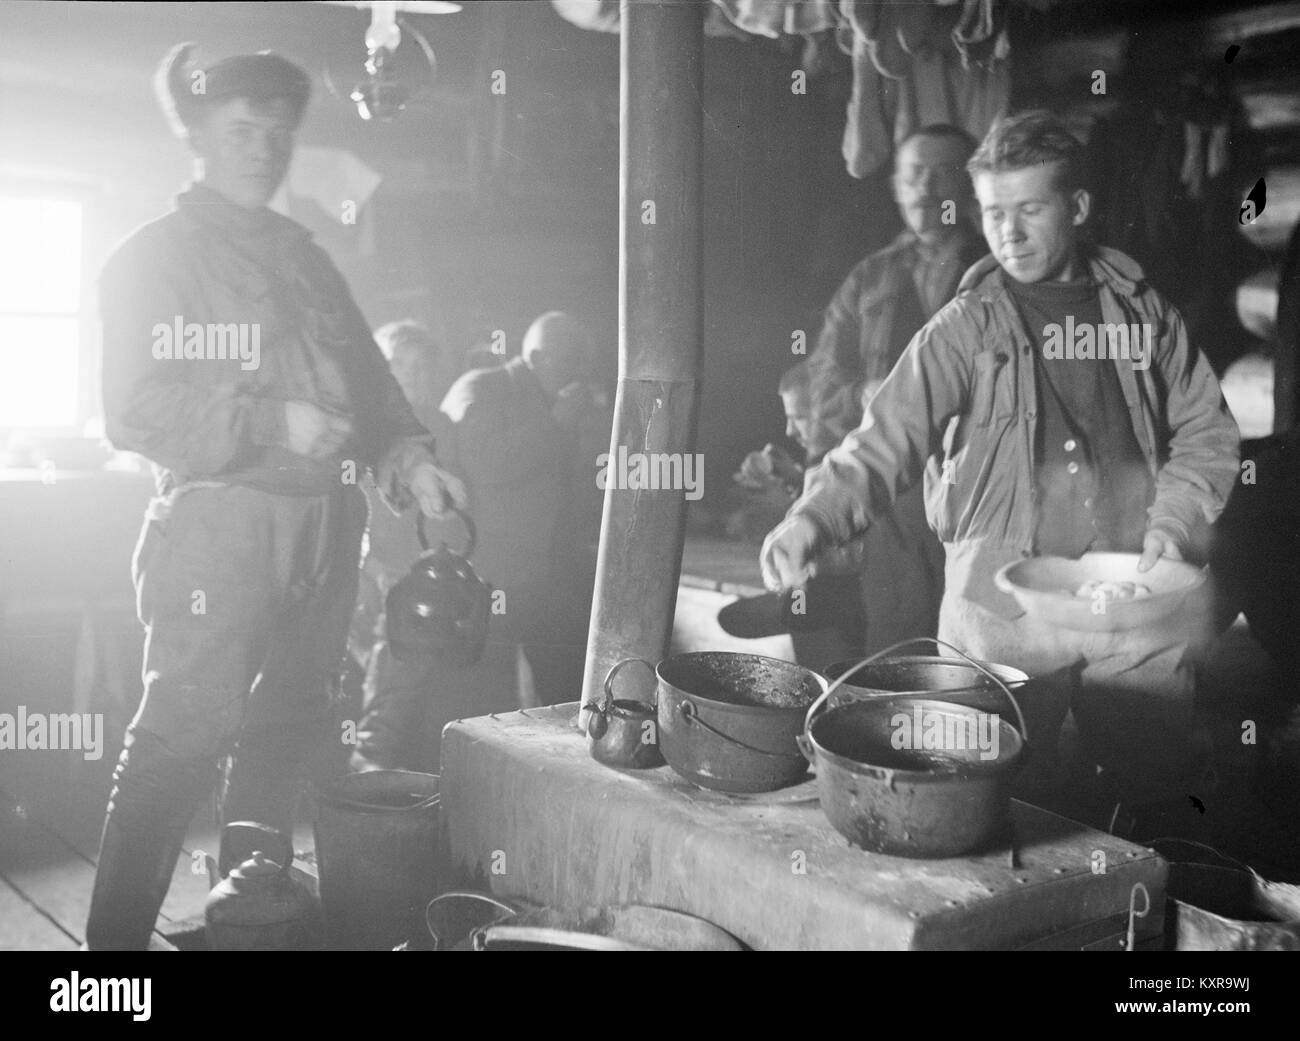 Male foresters cooking on stove in cabin, Finland 1930s Stock Photo